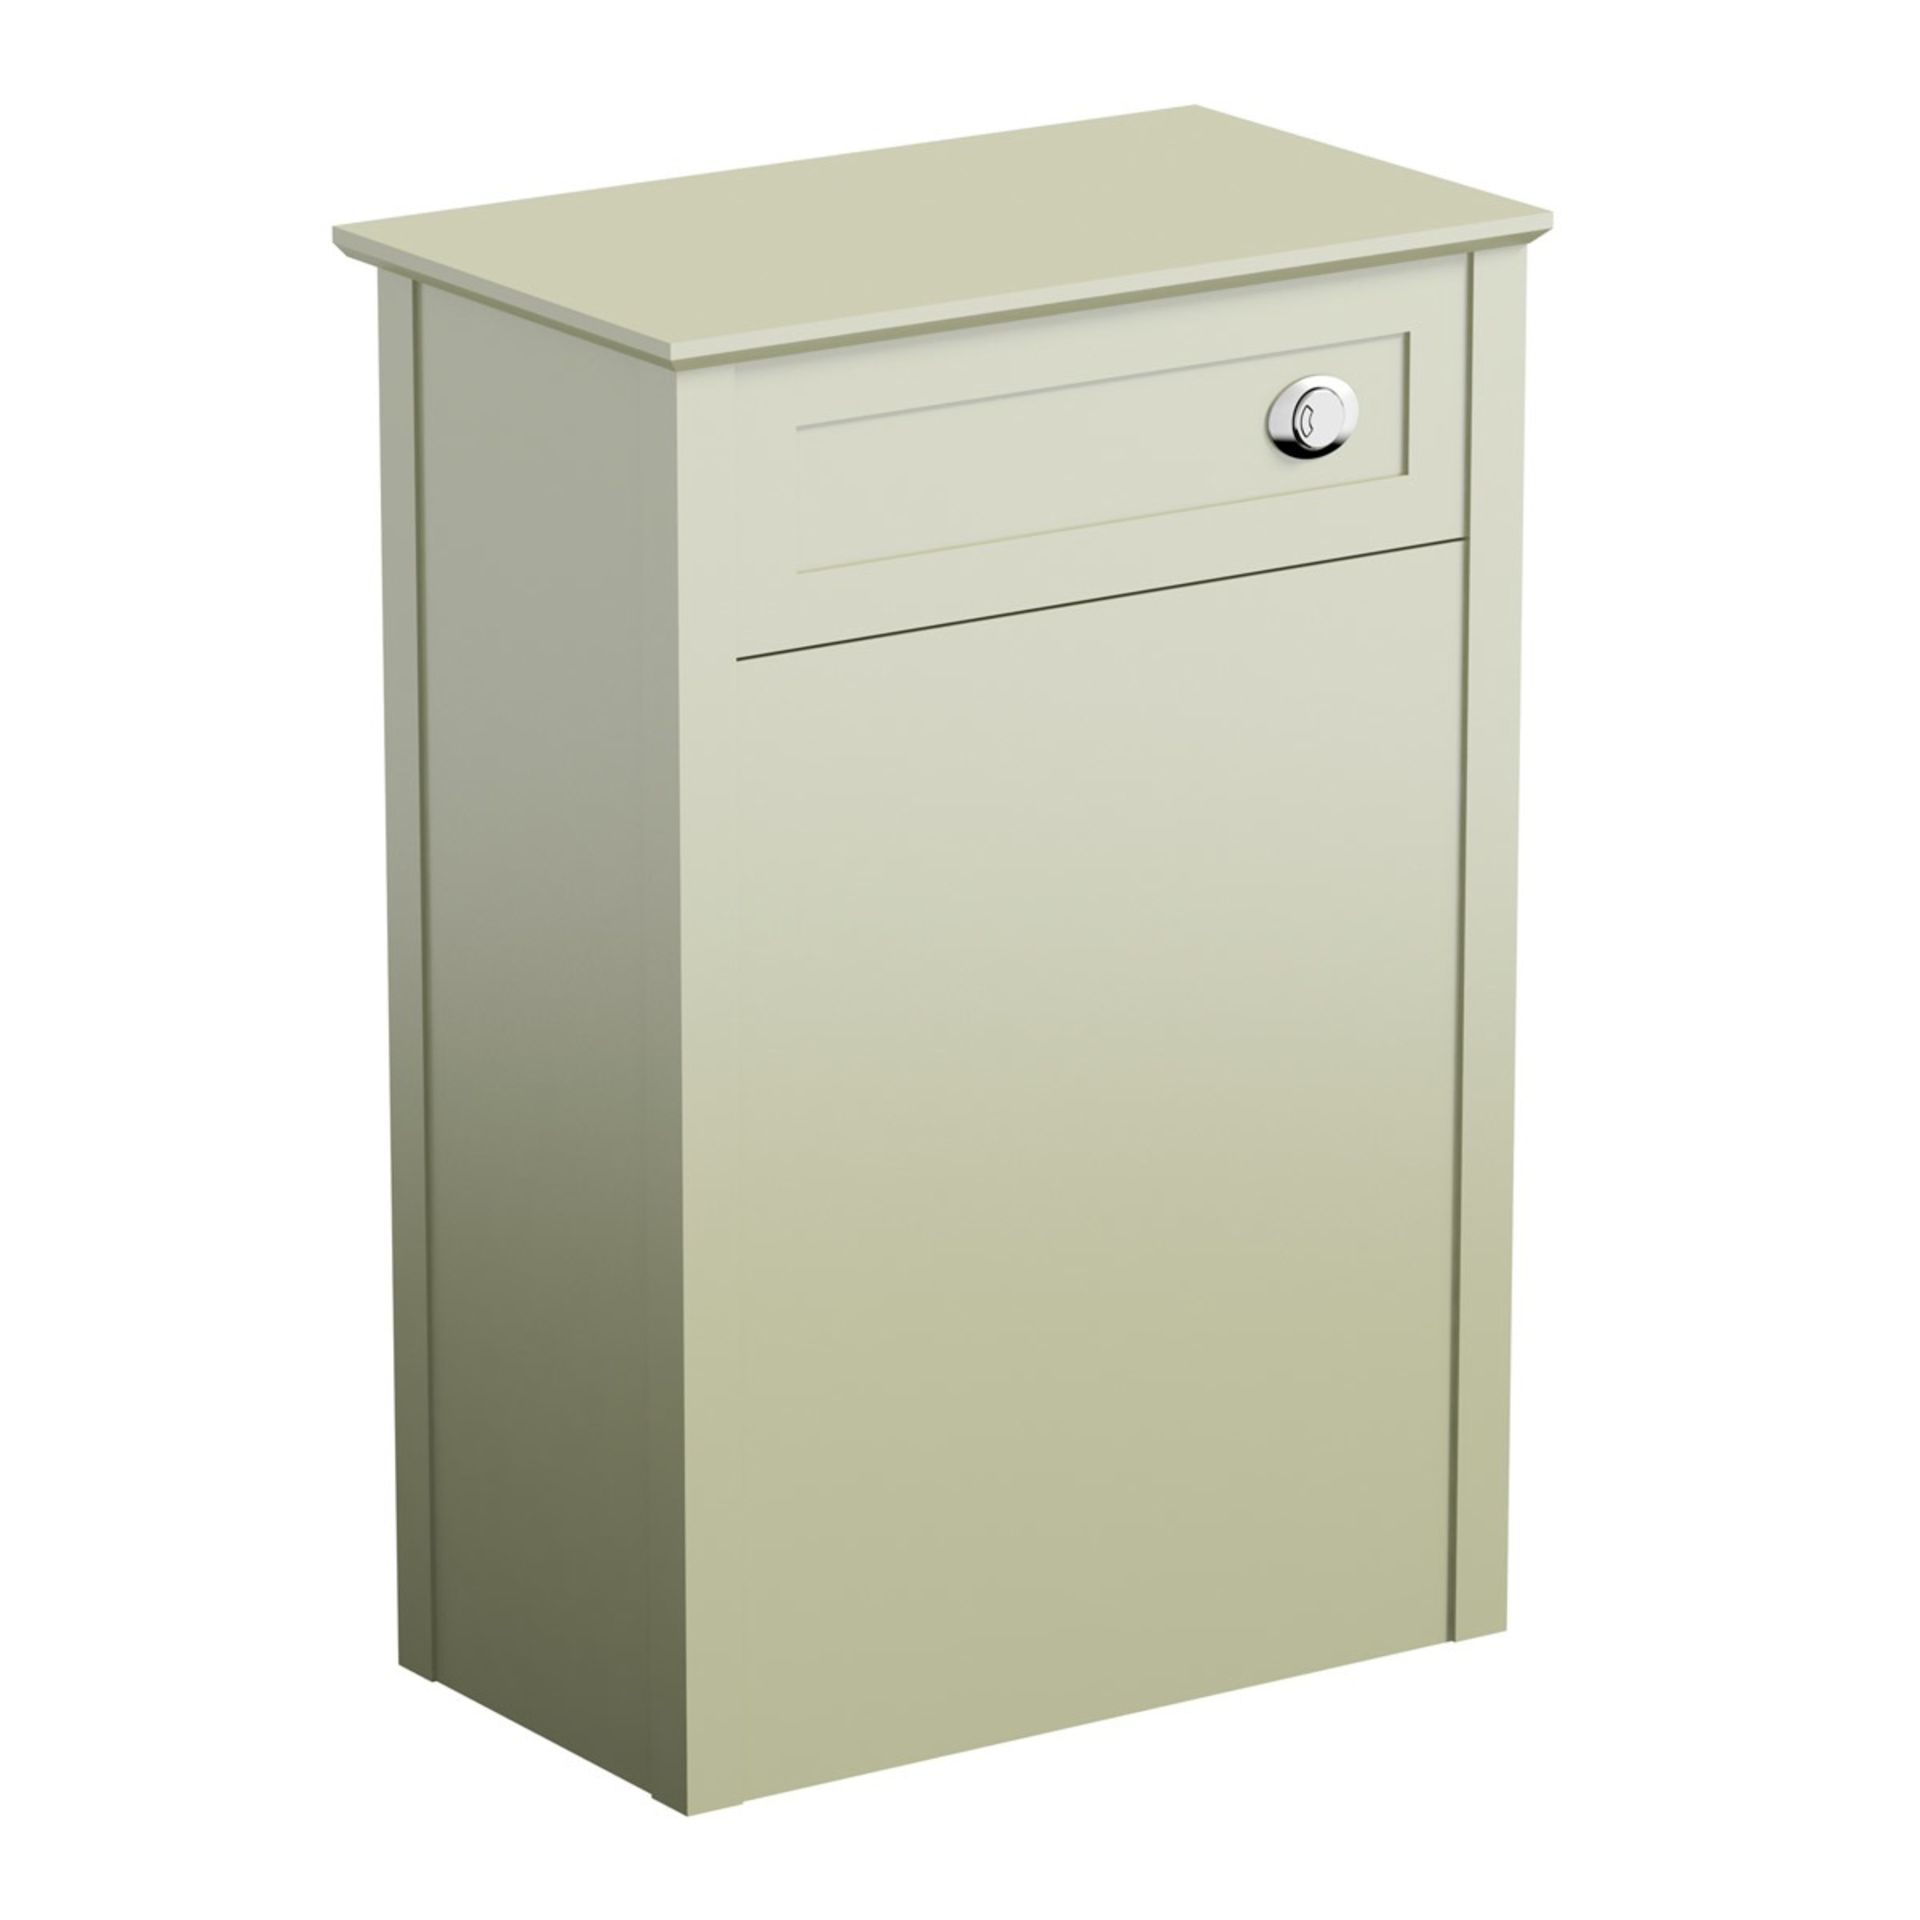 1 x Bath Co Camberley Sage Back to Wall Toilet Pan Unit - Toilet Pan Not Included - H818 x W570 x